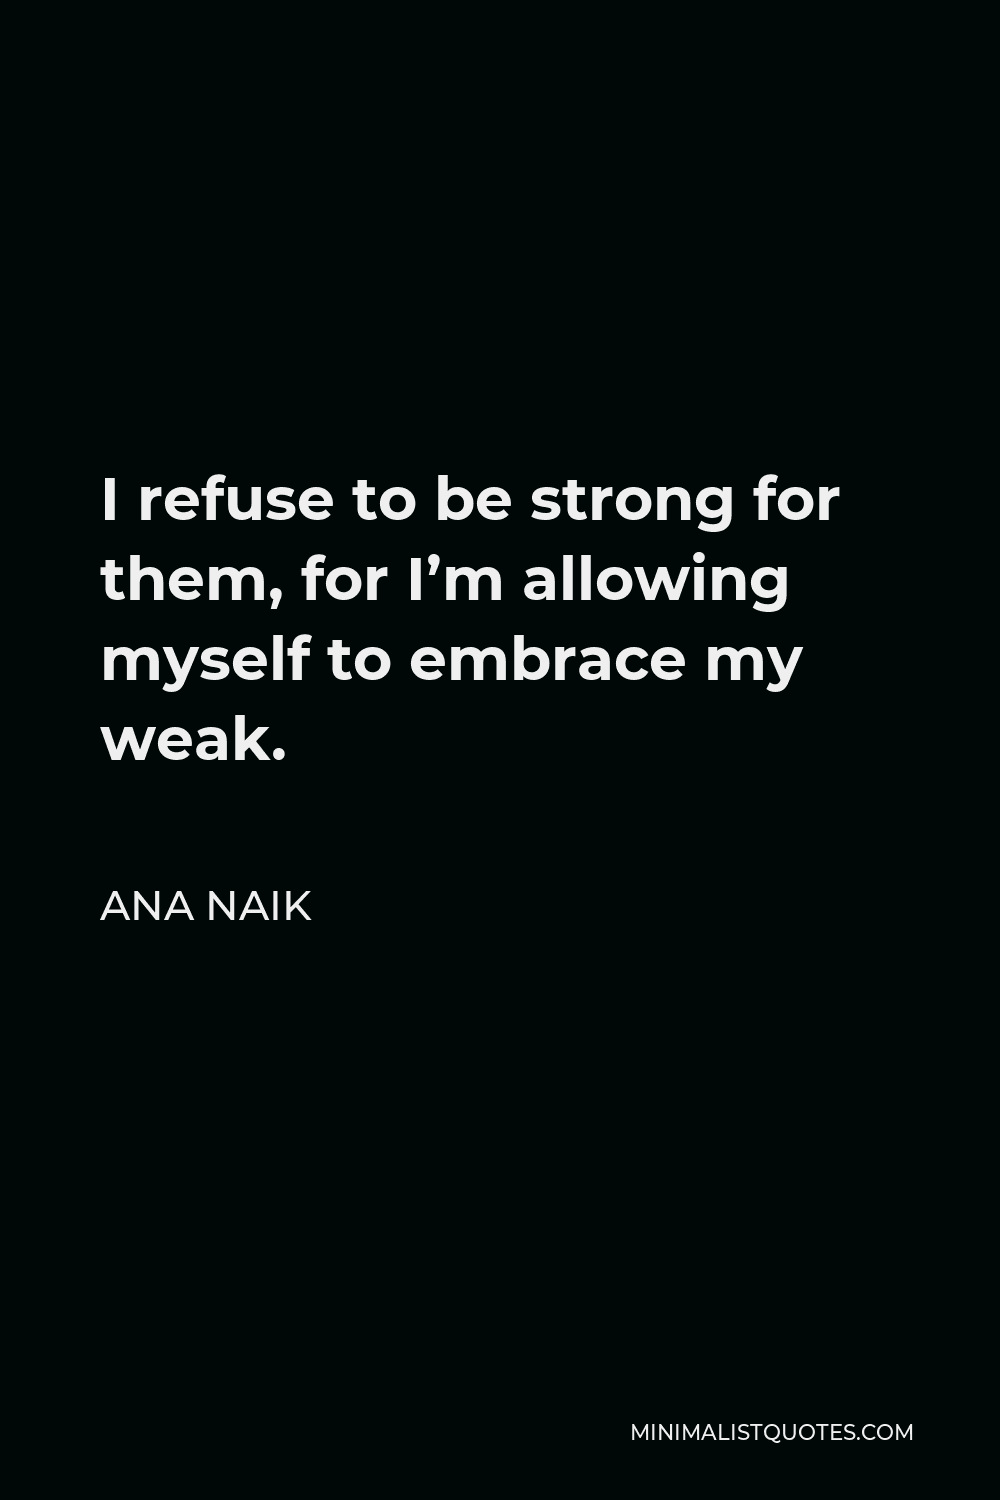 Ana Naik Quote - I refuse to be strong for them, for I’m allowing myself to embrace my weak.